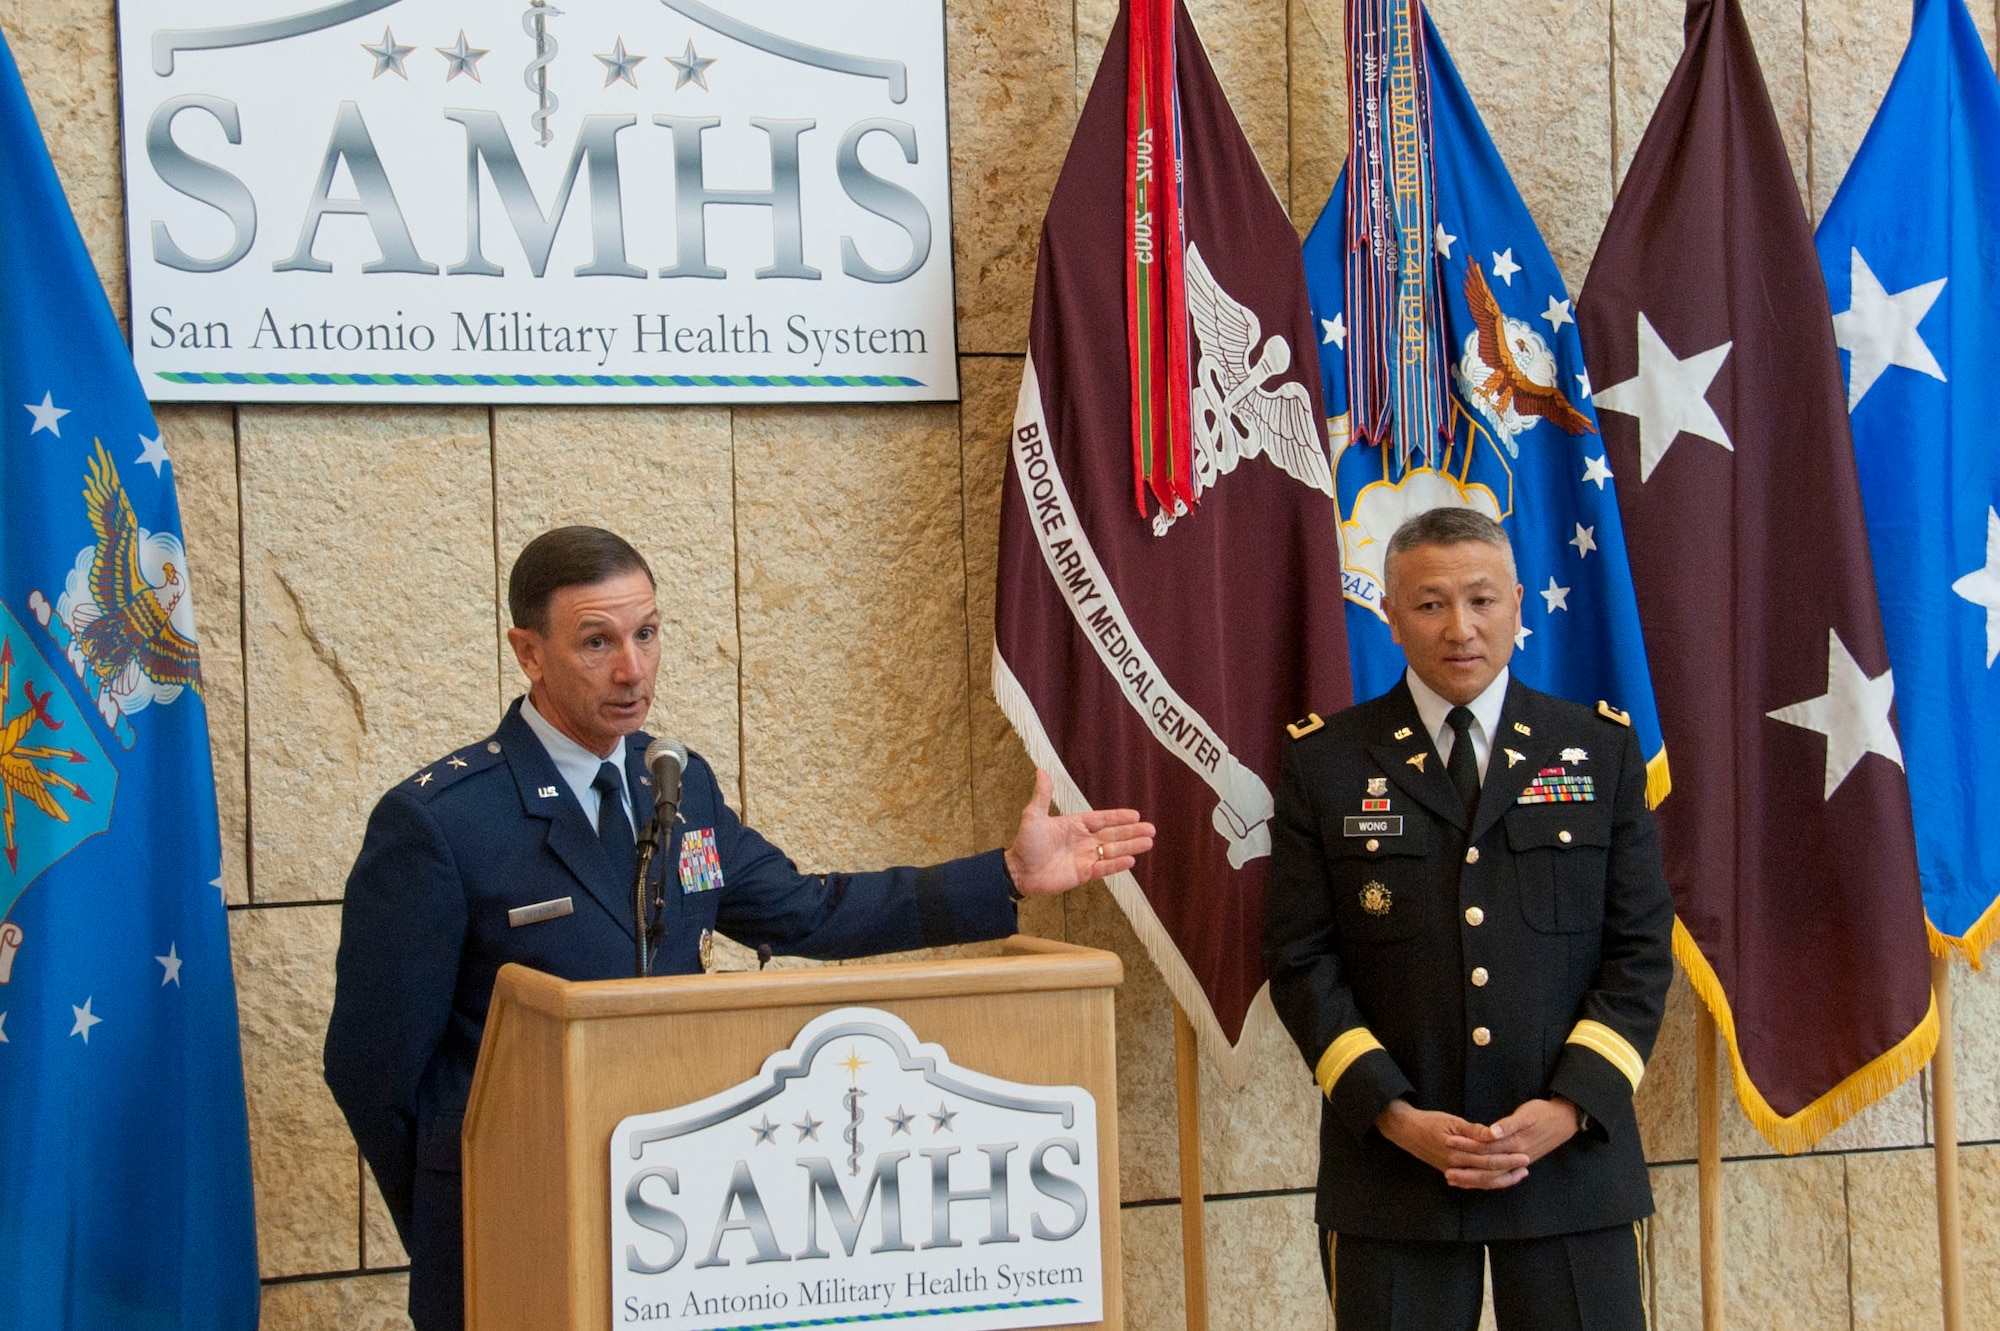 U.S. Air Force Maj. Gen. Byron Hepburn and Army Maj. Gen. Ted Wong speak during the San Antonio Military Health System one year anniversary  celebration at the San Antonio Military Medical Center, Fort Sam Houston, Texas, Sept. 14.  Hepburn is the SAMHS director and the 59th Medical Wing commander.  Wong is the deputy director and the Brooke Army Medical Center commander. (U.S. Air Force photo/SSgt. Corey Hook)
